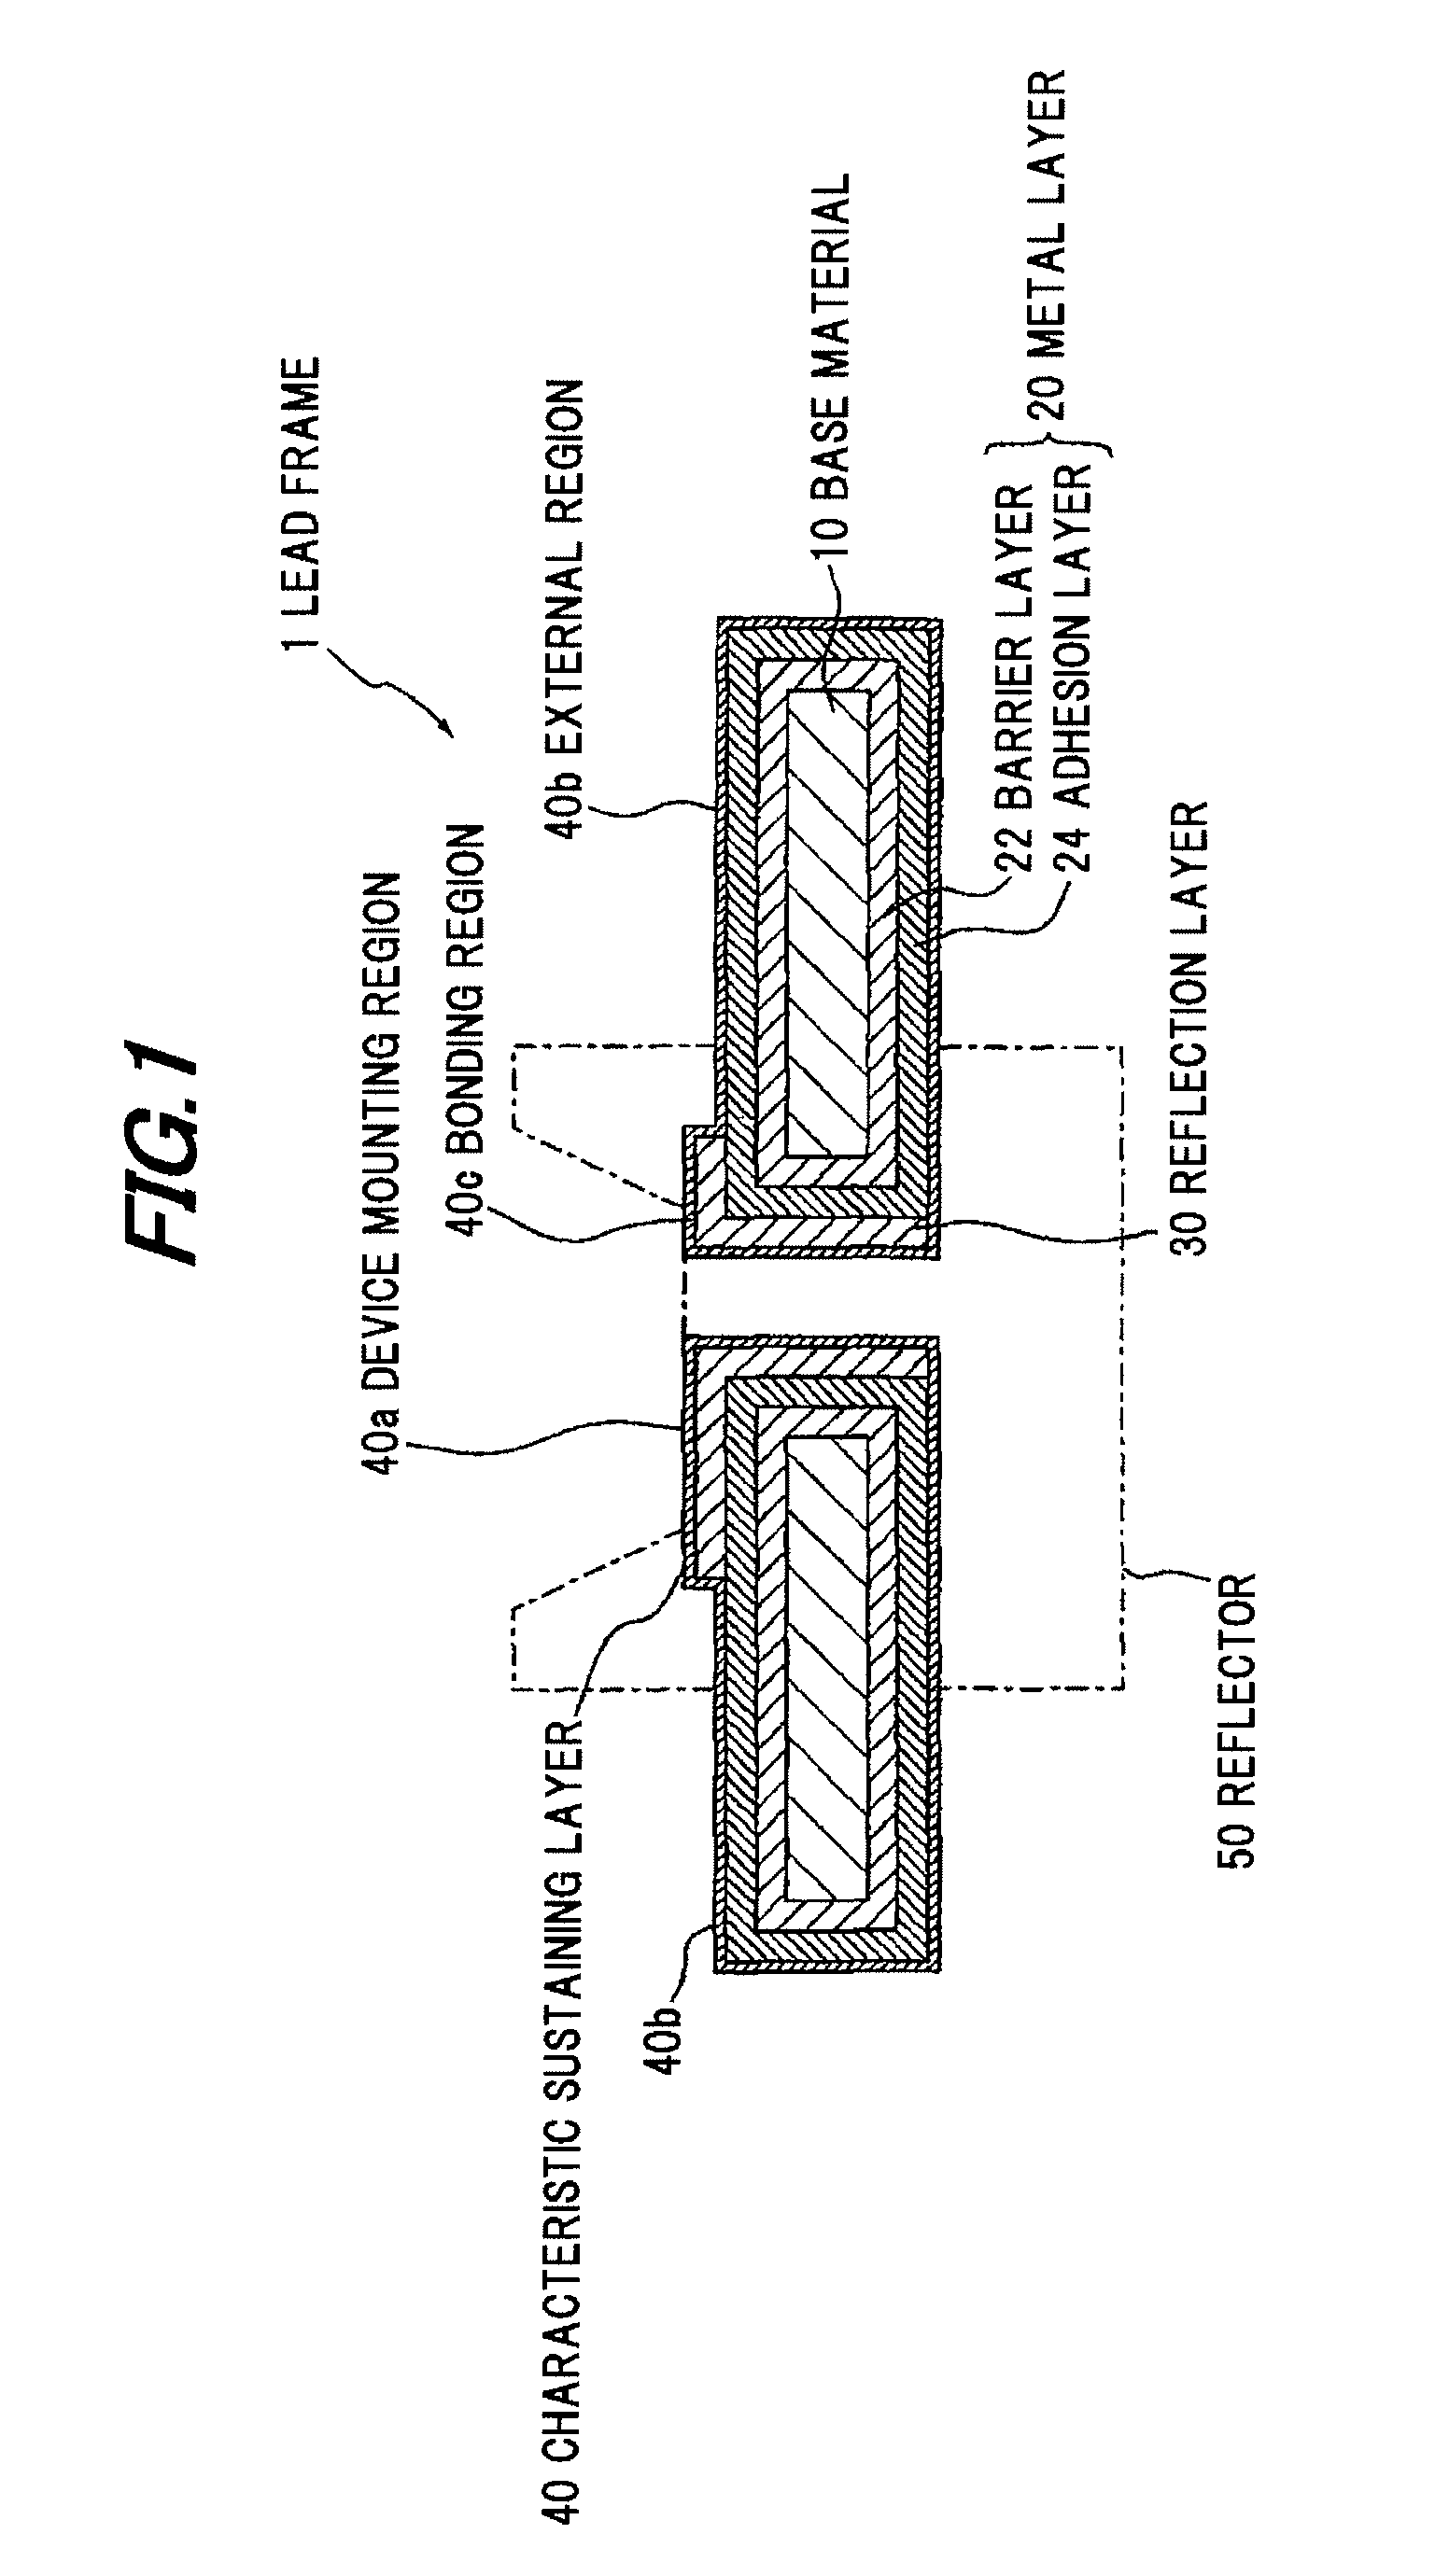 Lead frame, method of making the same and light receiving/emitting device